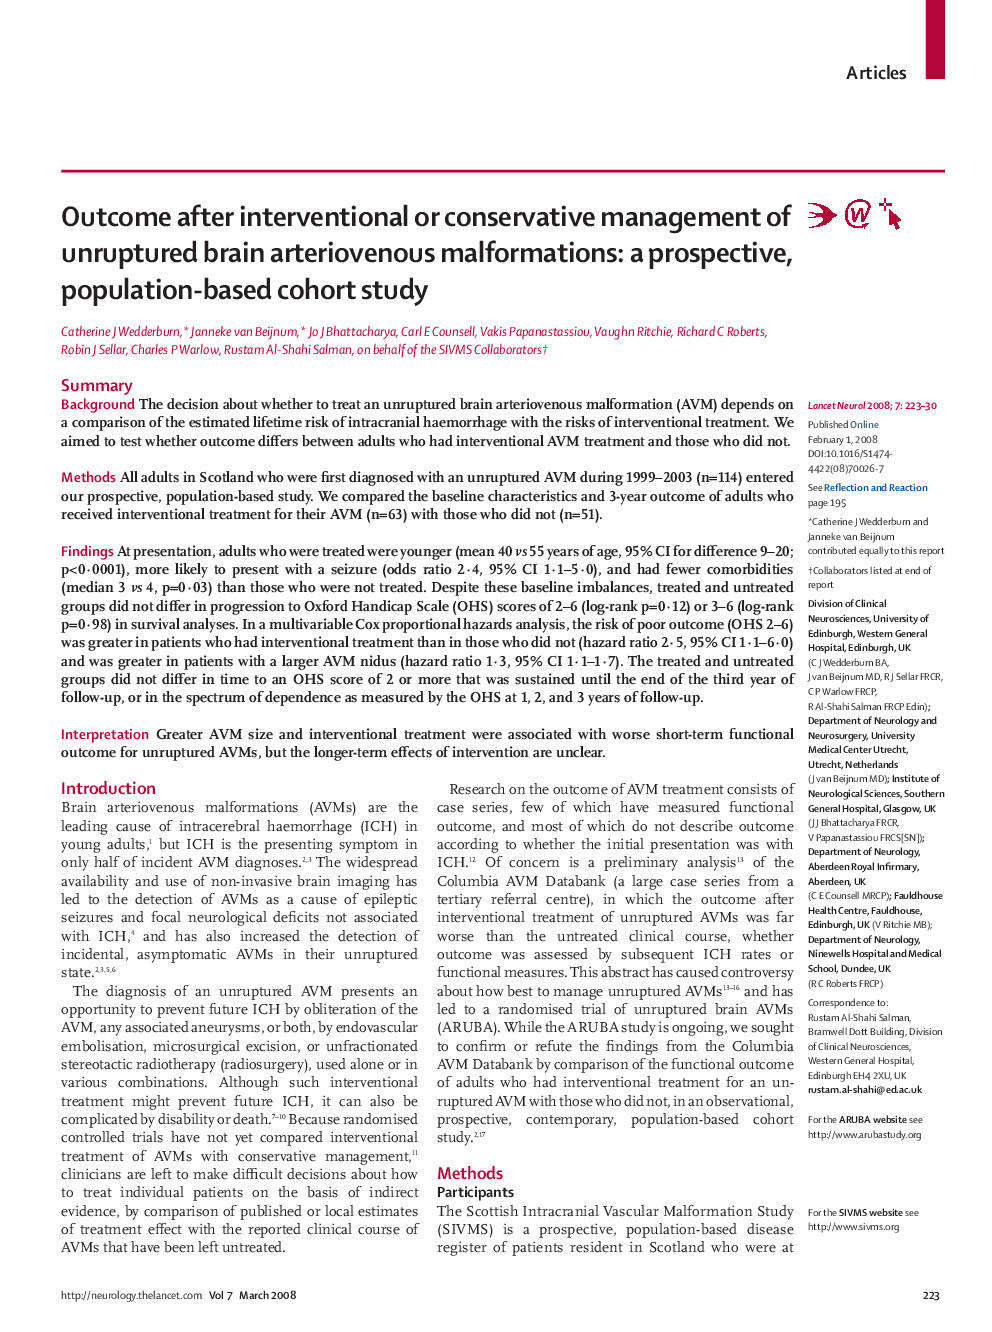 Outcome after interventional or conservative management of unruptured brain arteriovenous malformations: a prospective, population-based cohort study